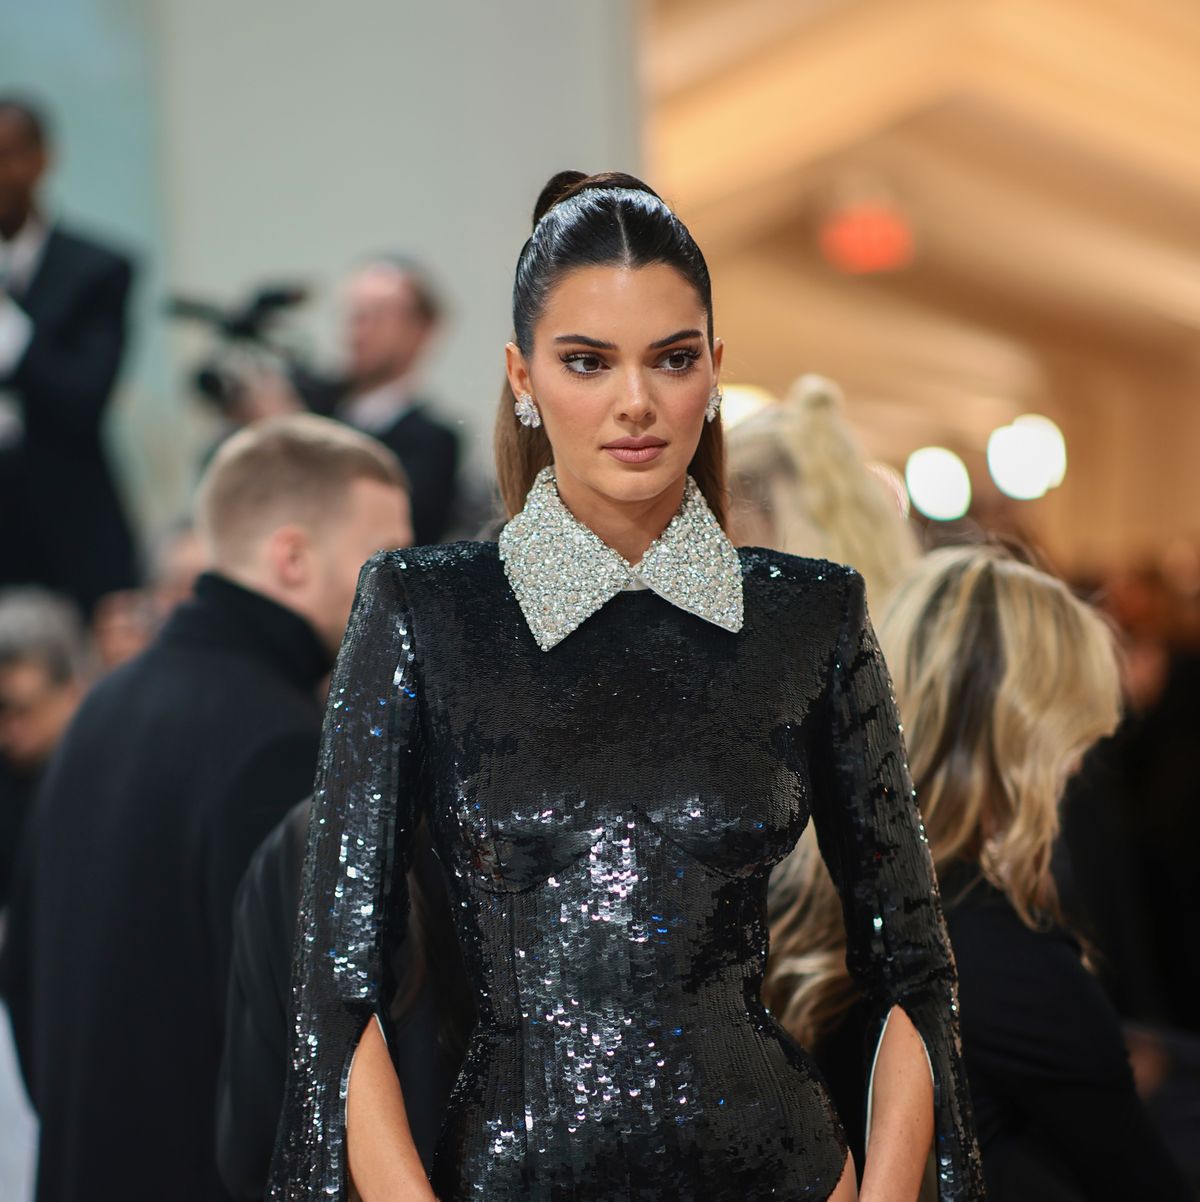 Kendall Jenner just wore this Fashion Editor approved designer It